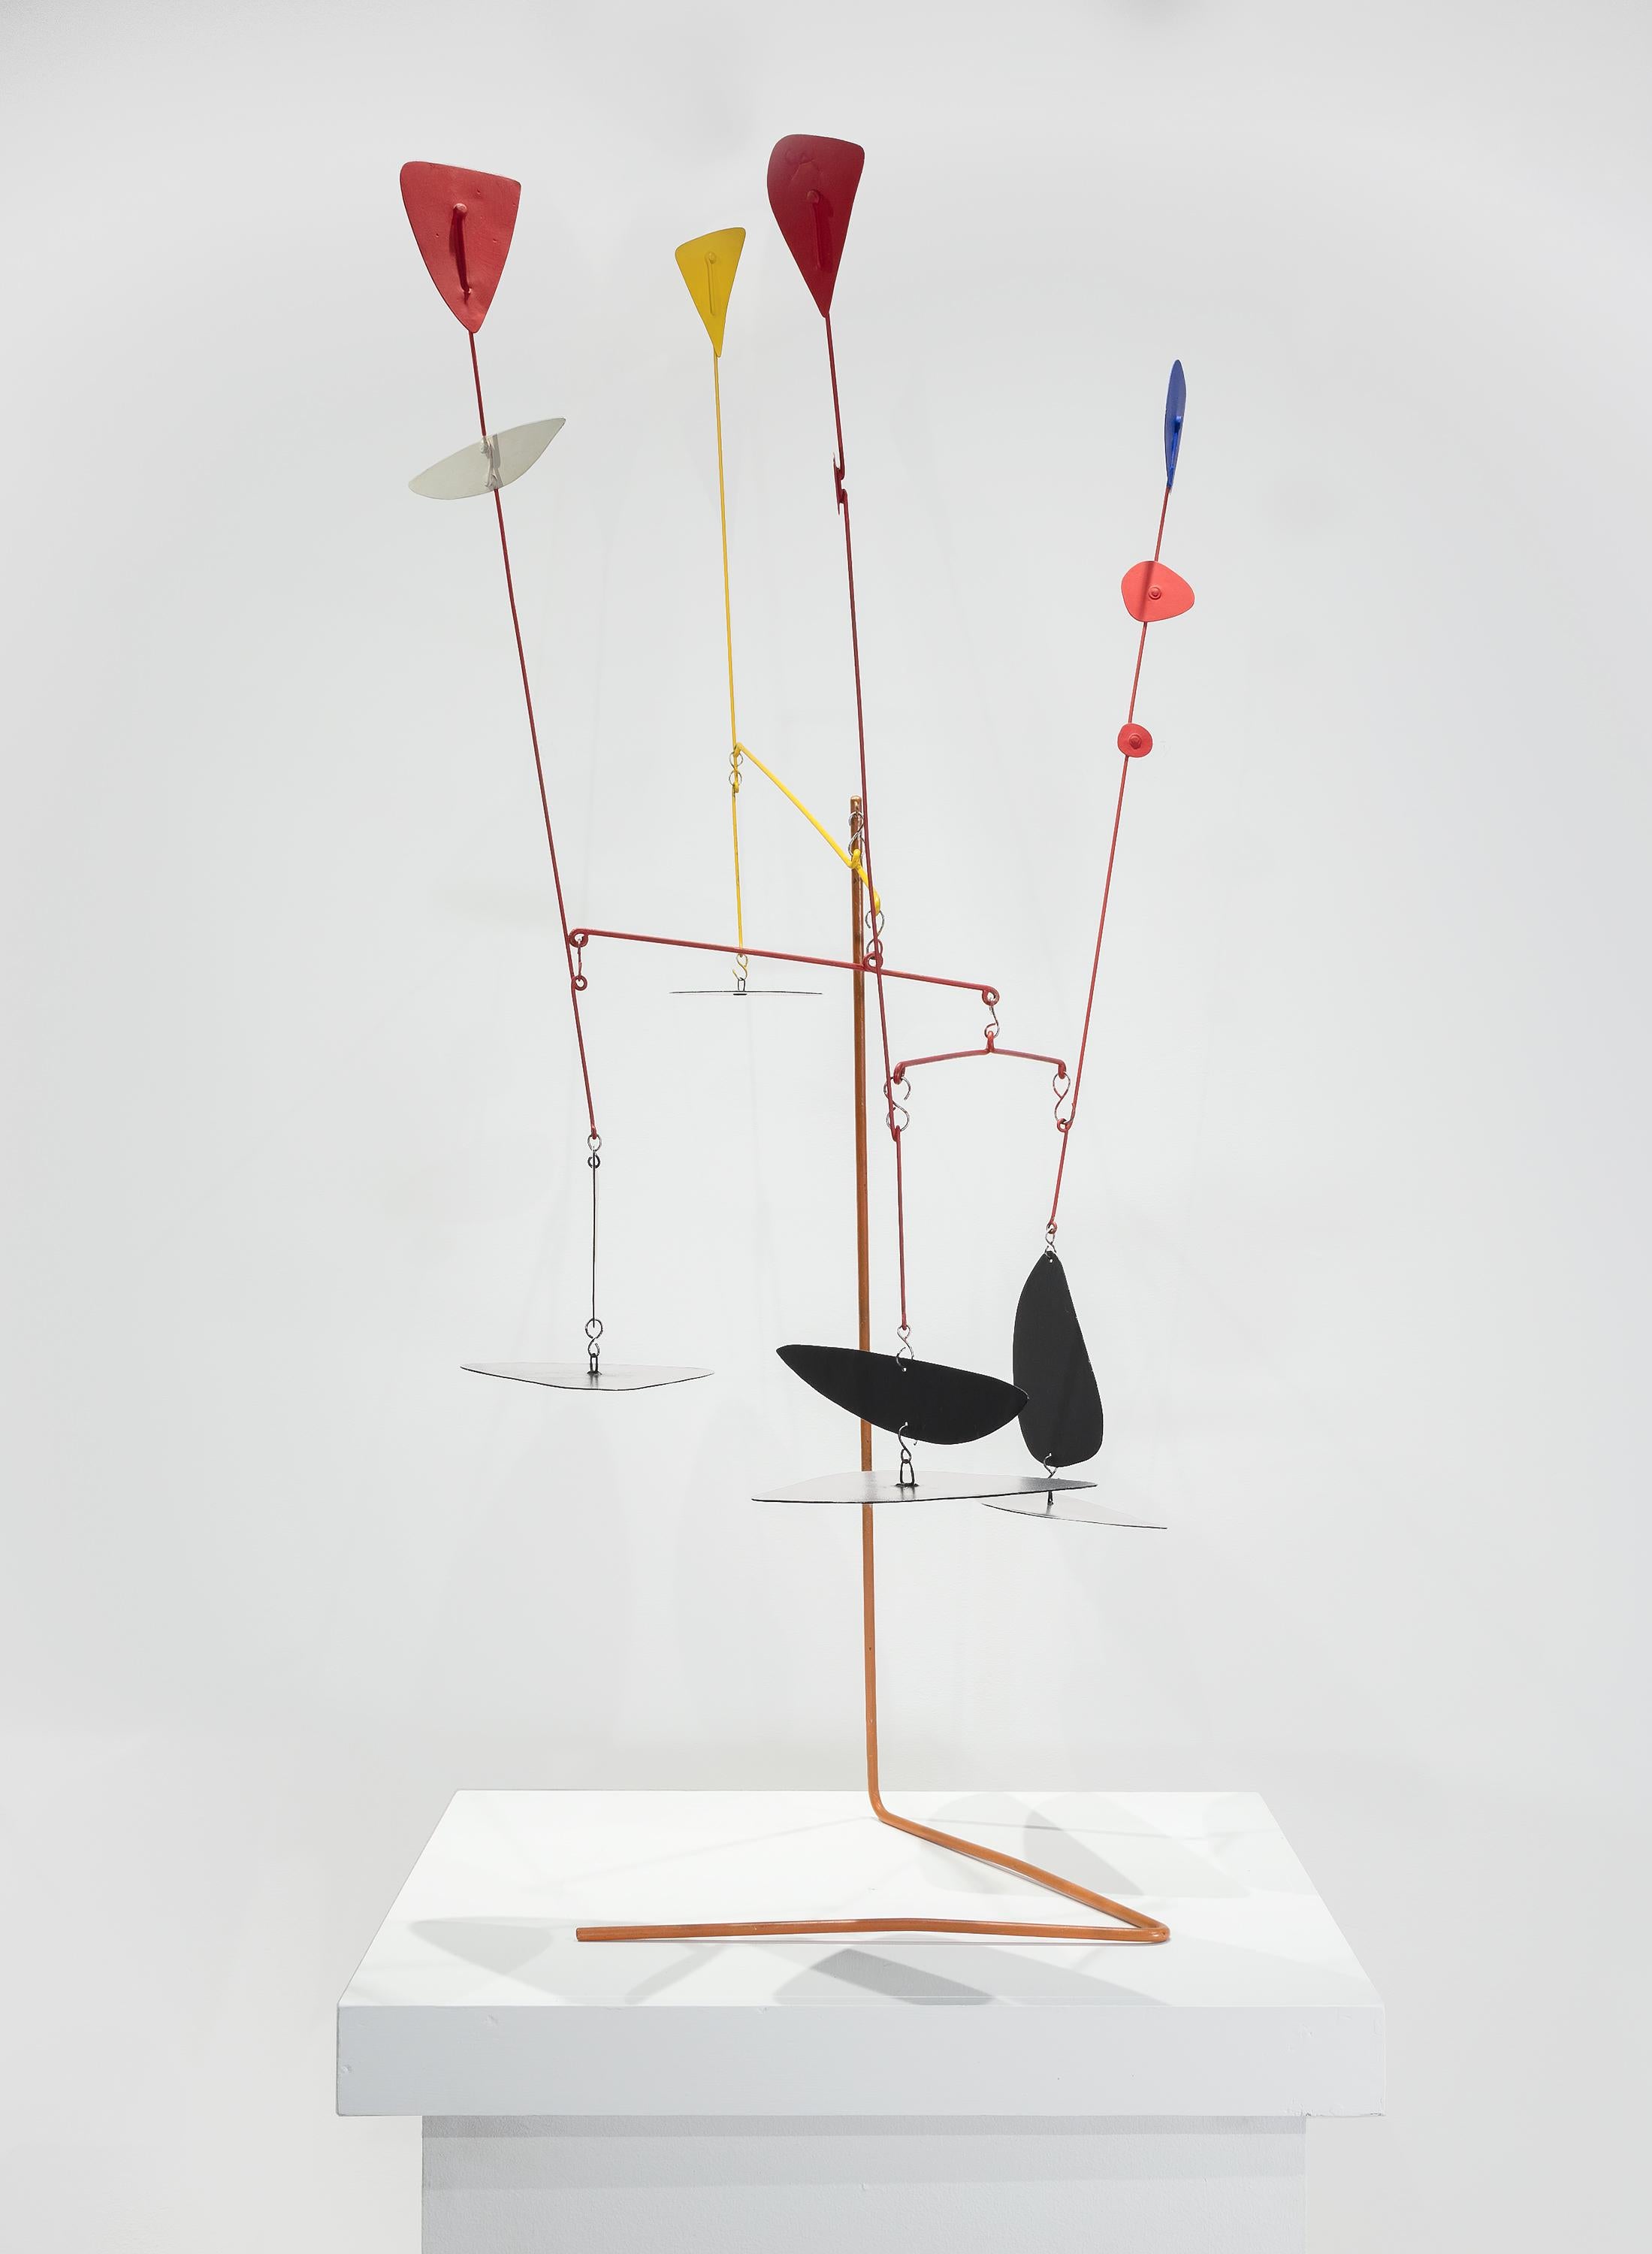 Prelude to the Man Eater, A03849 - Sculpture by Alexander Calder